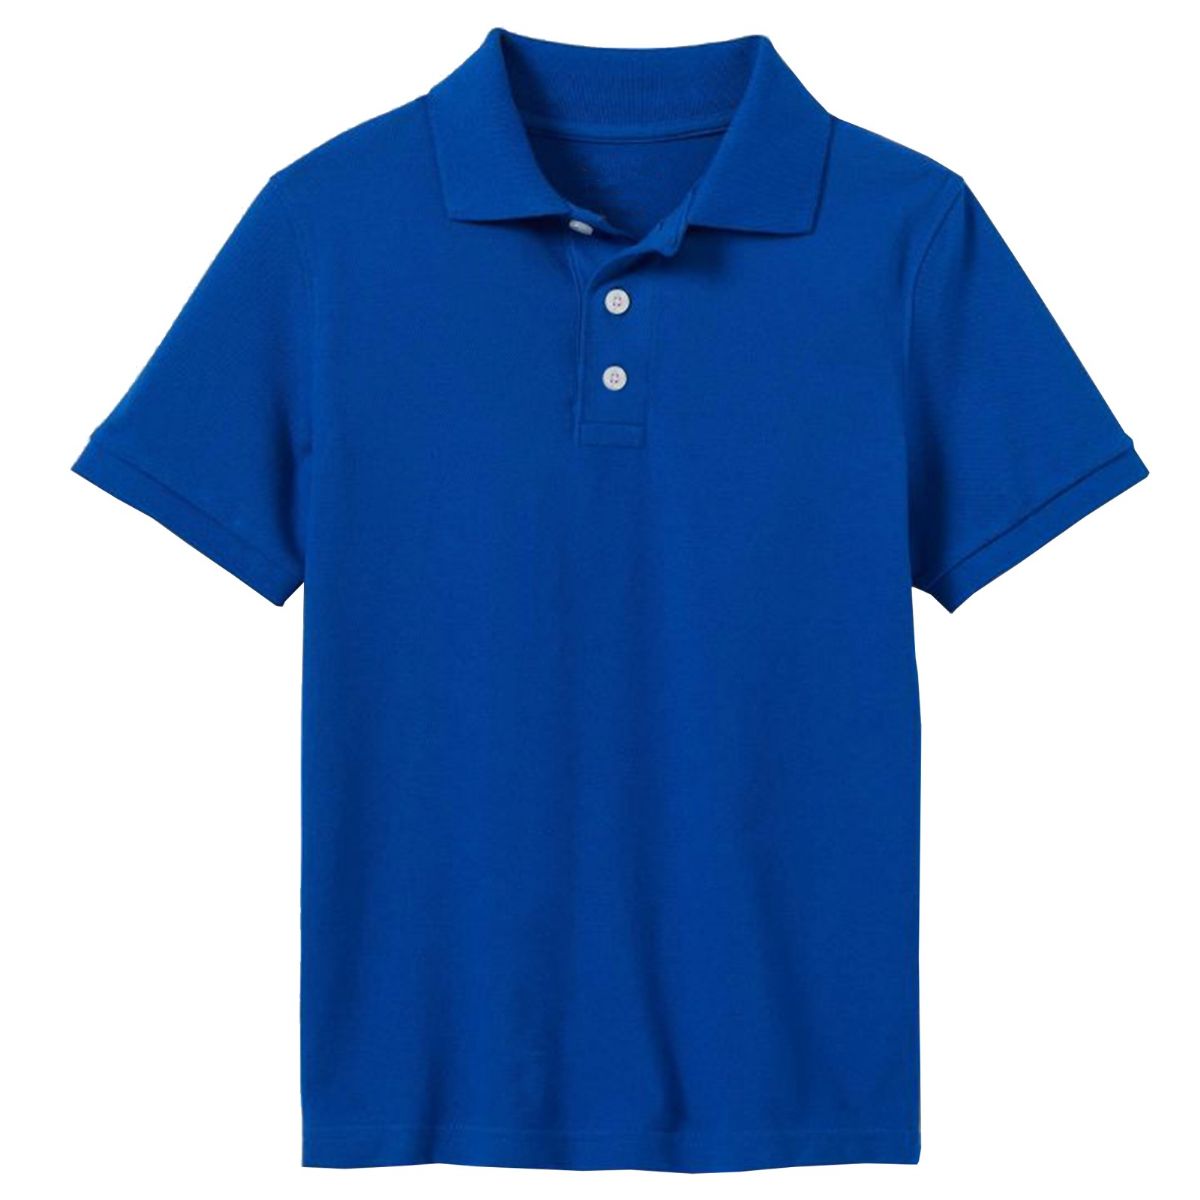 24 Pieces of Youth Polo Shirt Royal Blue In Size xs